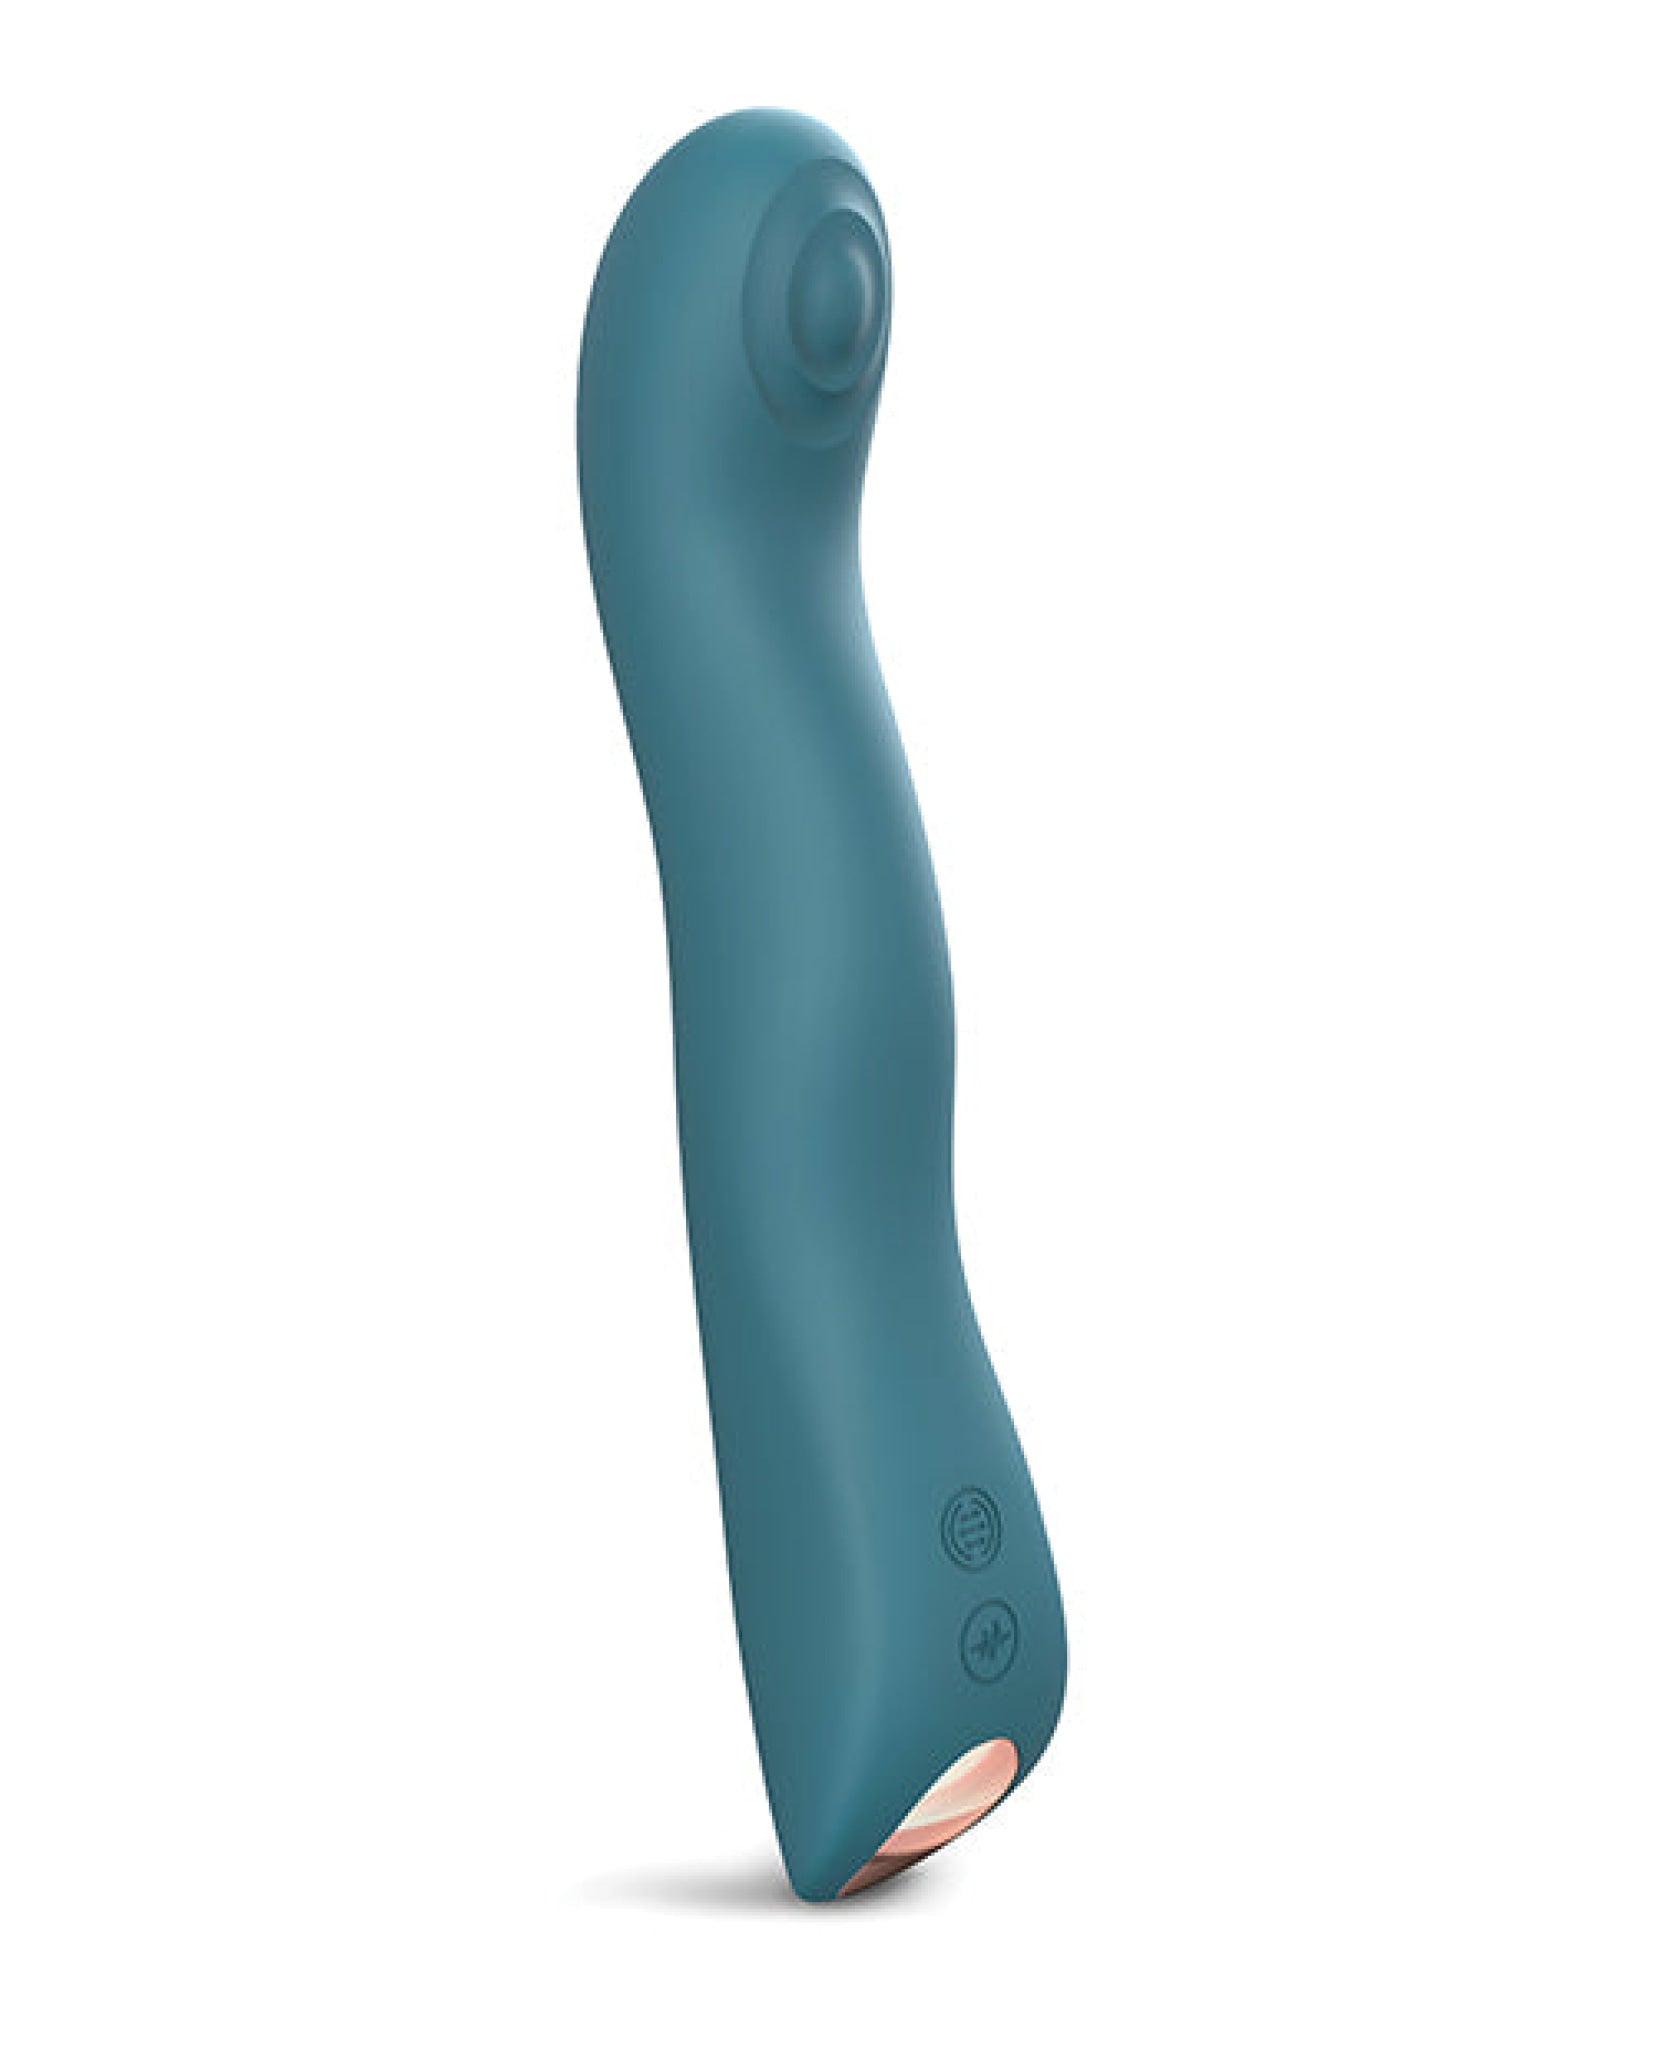 Love To Love Swap Tapping Vibrator - Teal Me Love To Love